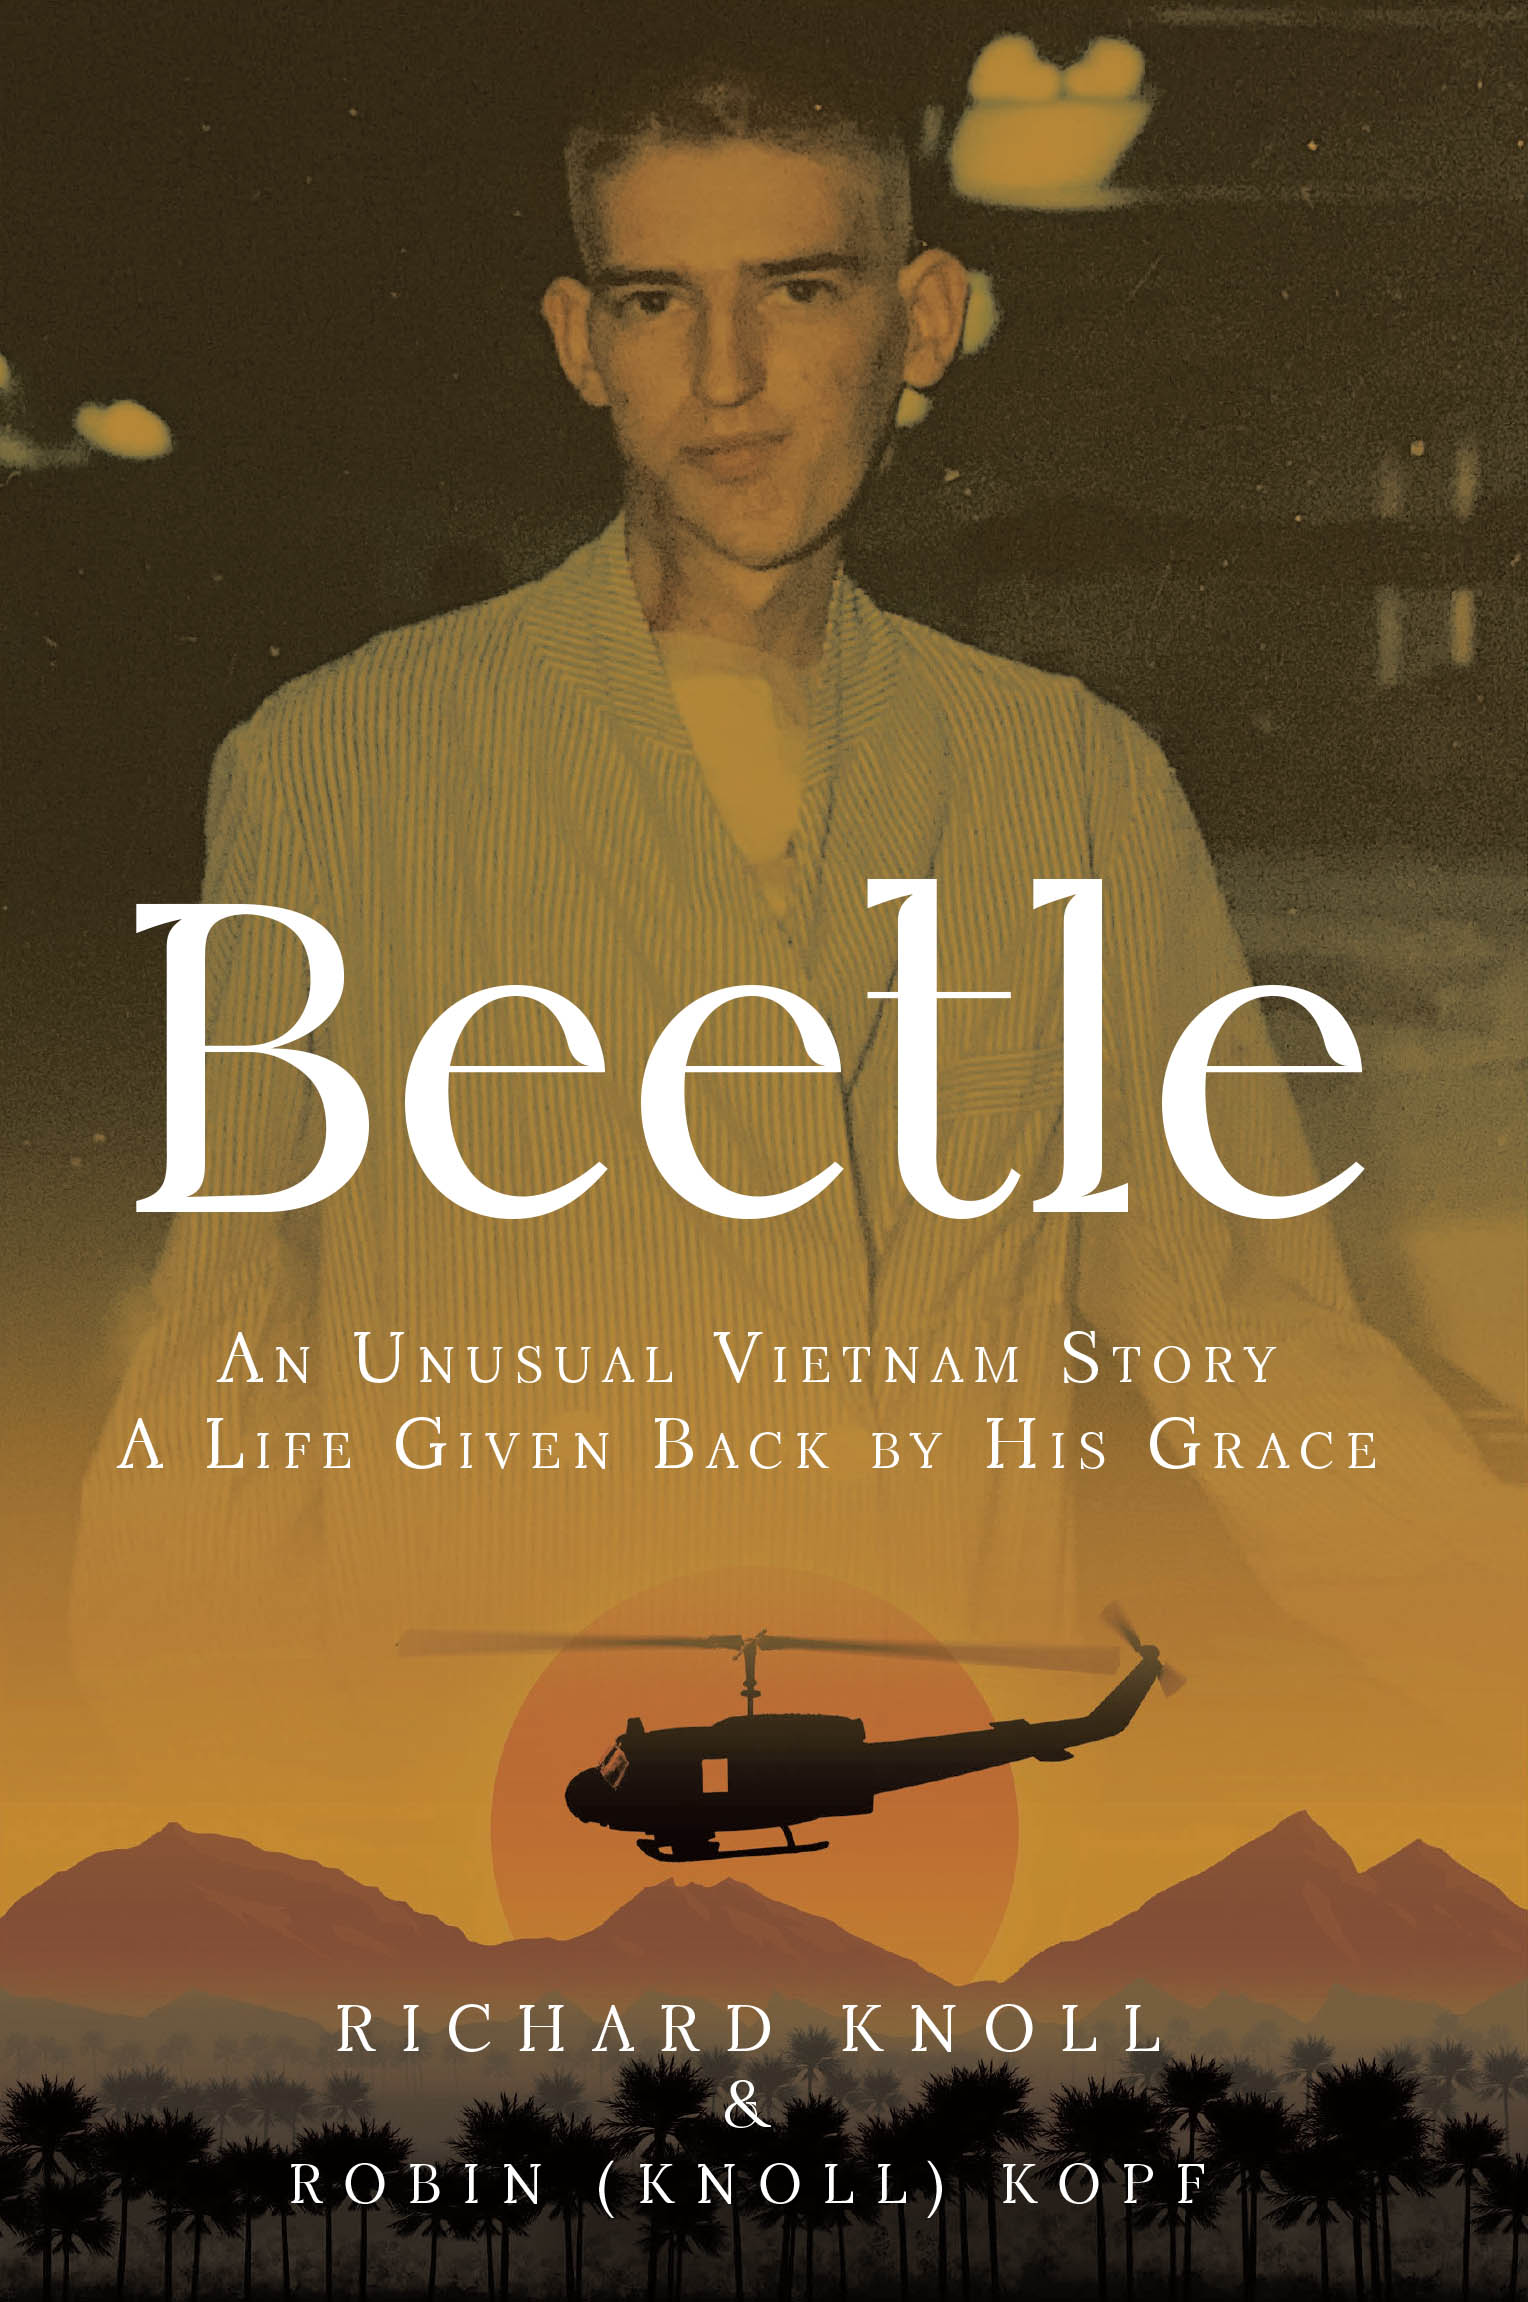 Richard Knoll and Robin Kopf’s Newly Released “Beetle: AN UNUSUAL VIETNAM STORY A LIFE GIVEN BACK BY HIS GRACE” is a Powerful Look Into the Vietnam War